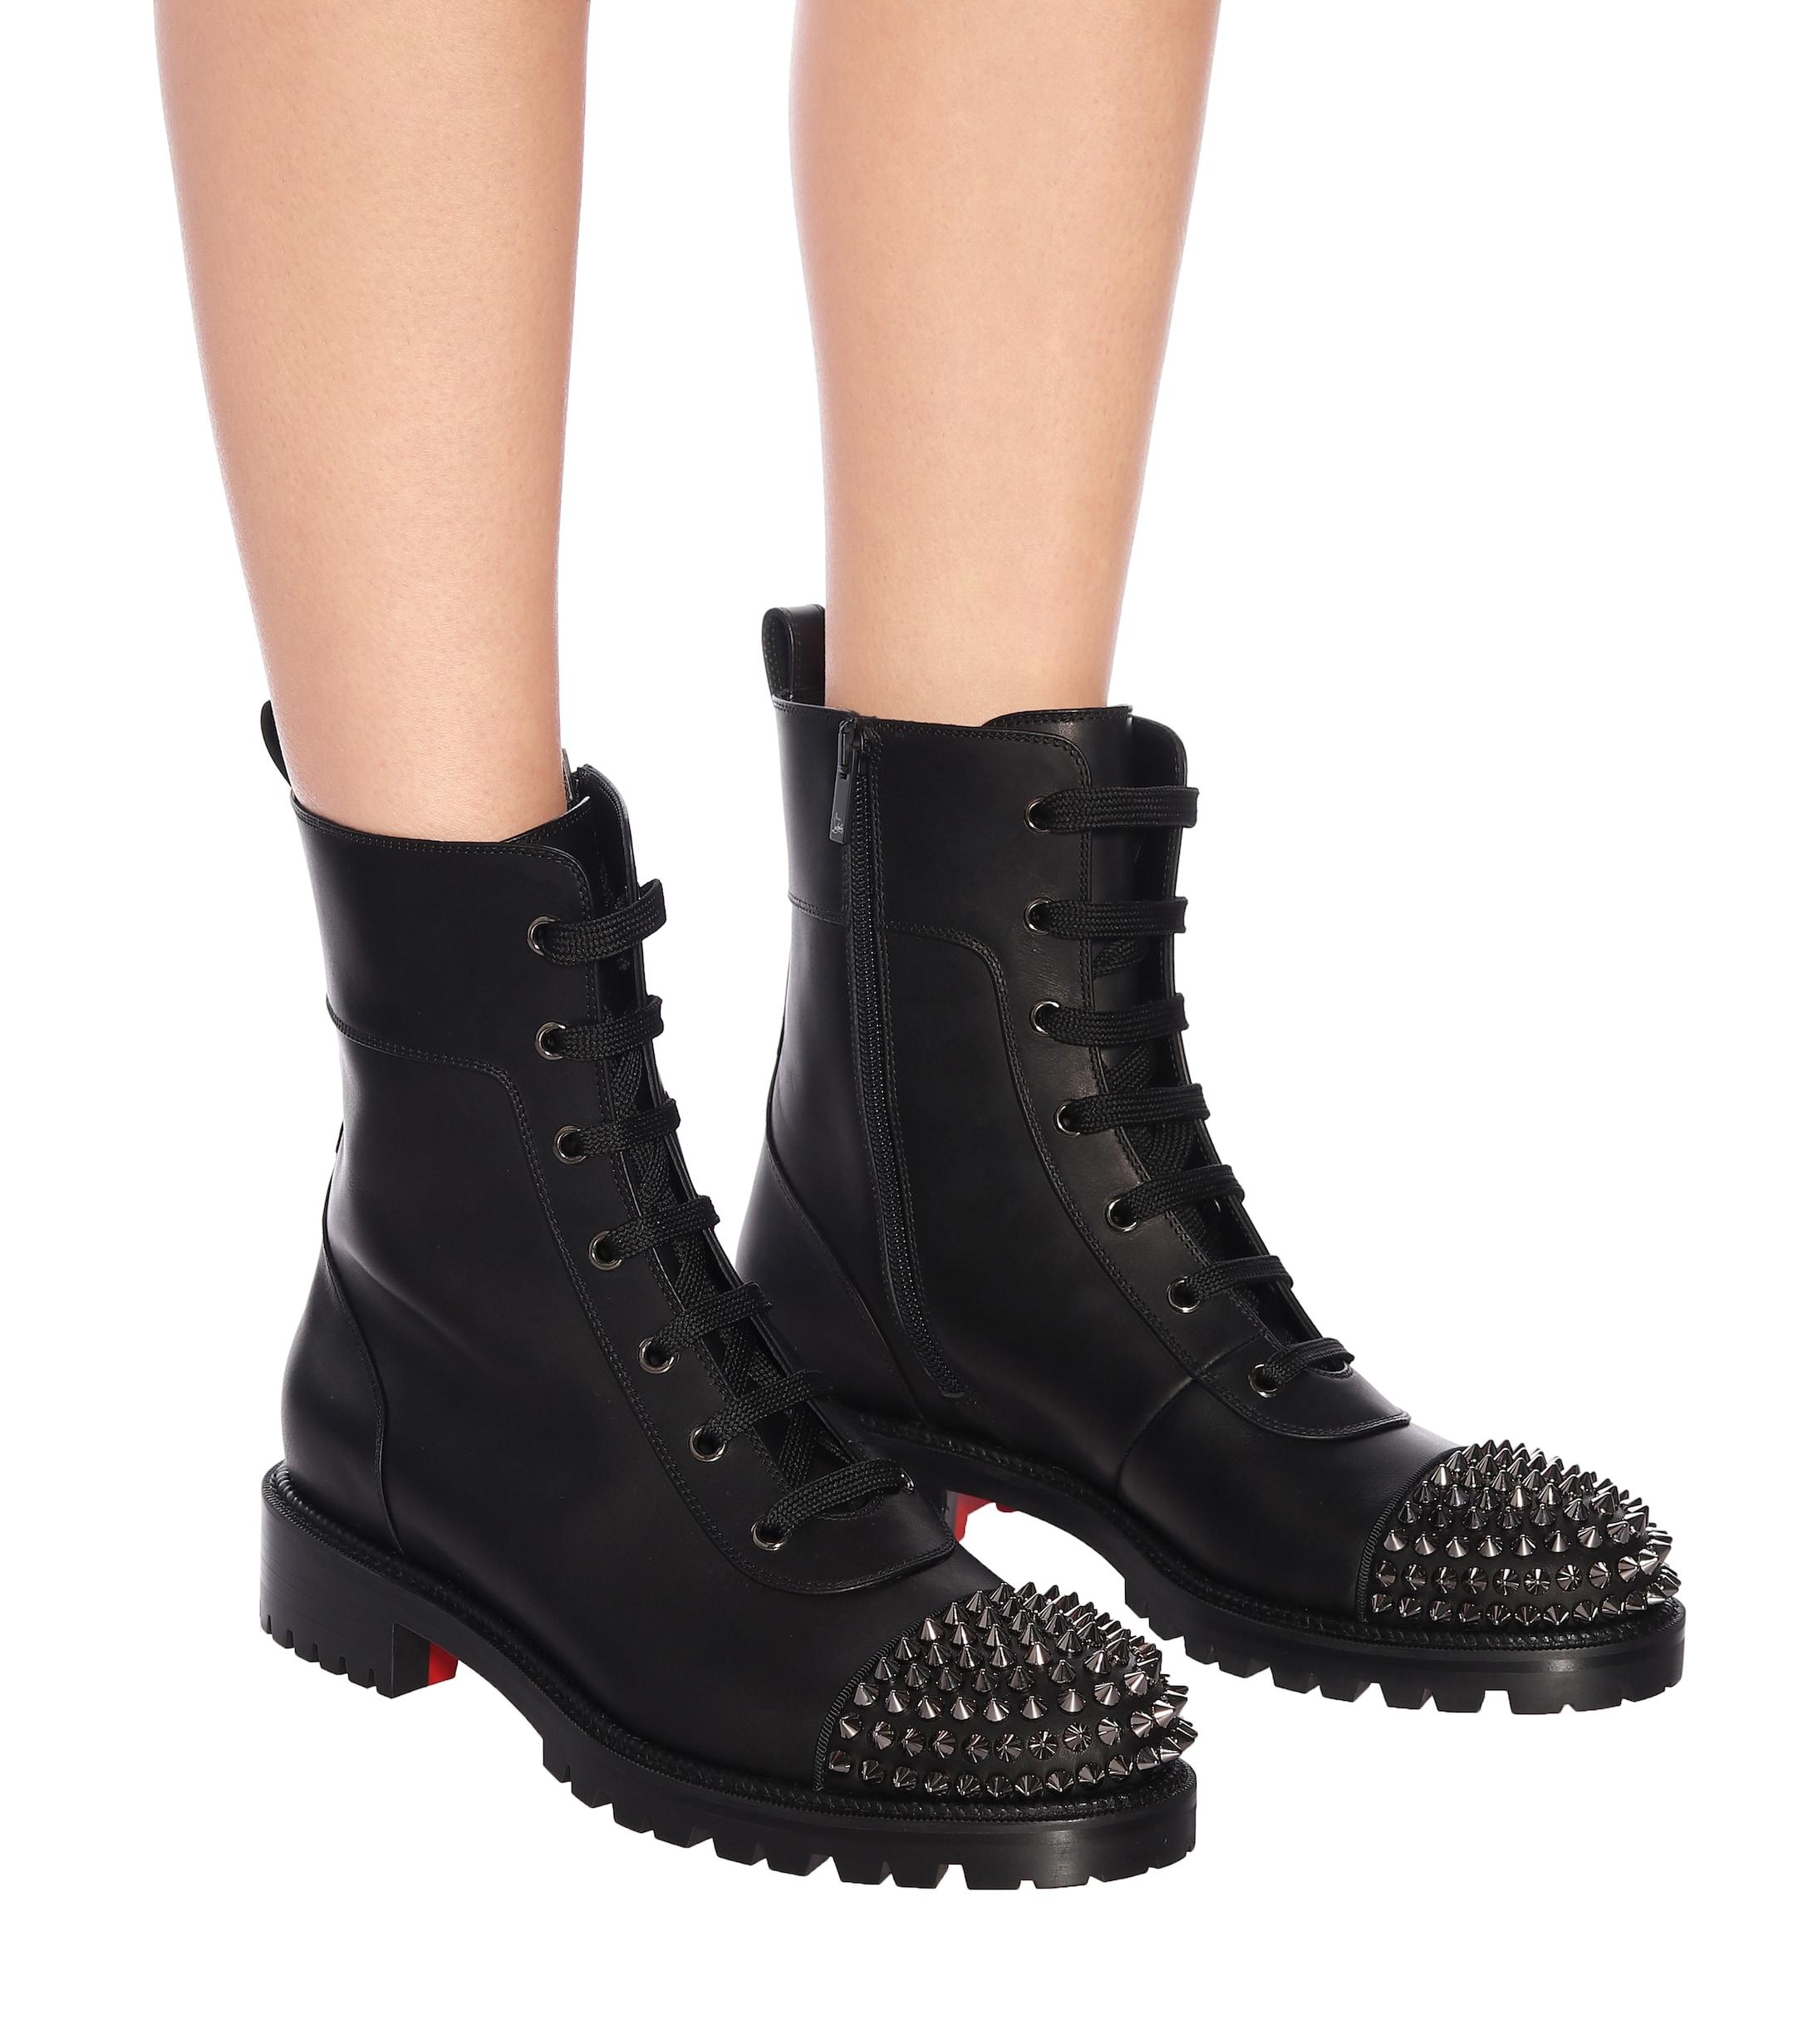 Christian Louboutin Rubber Ts Croc Boots in Black - Lyst